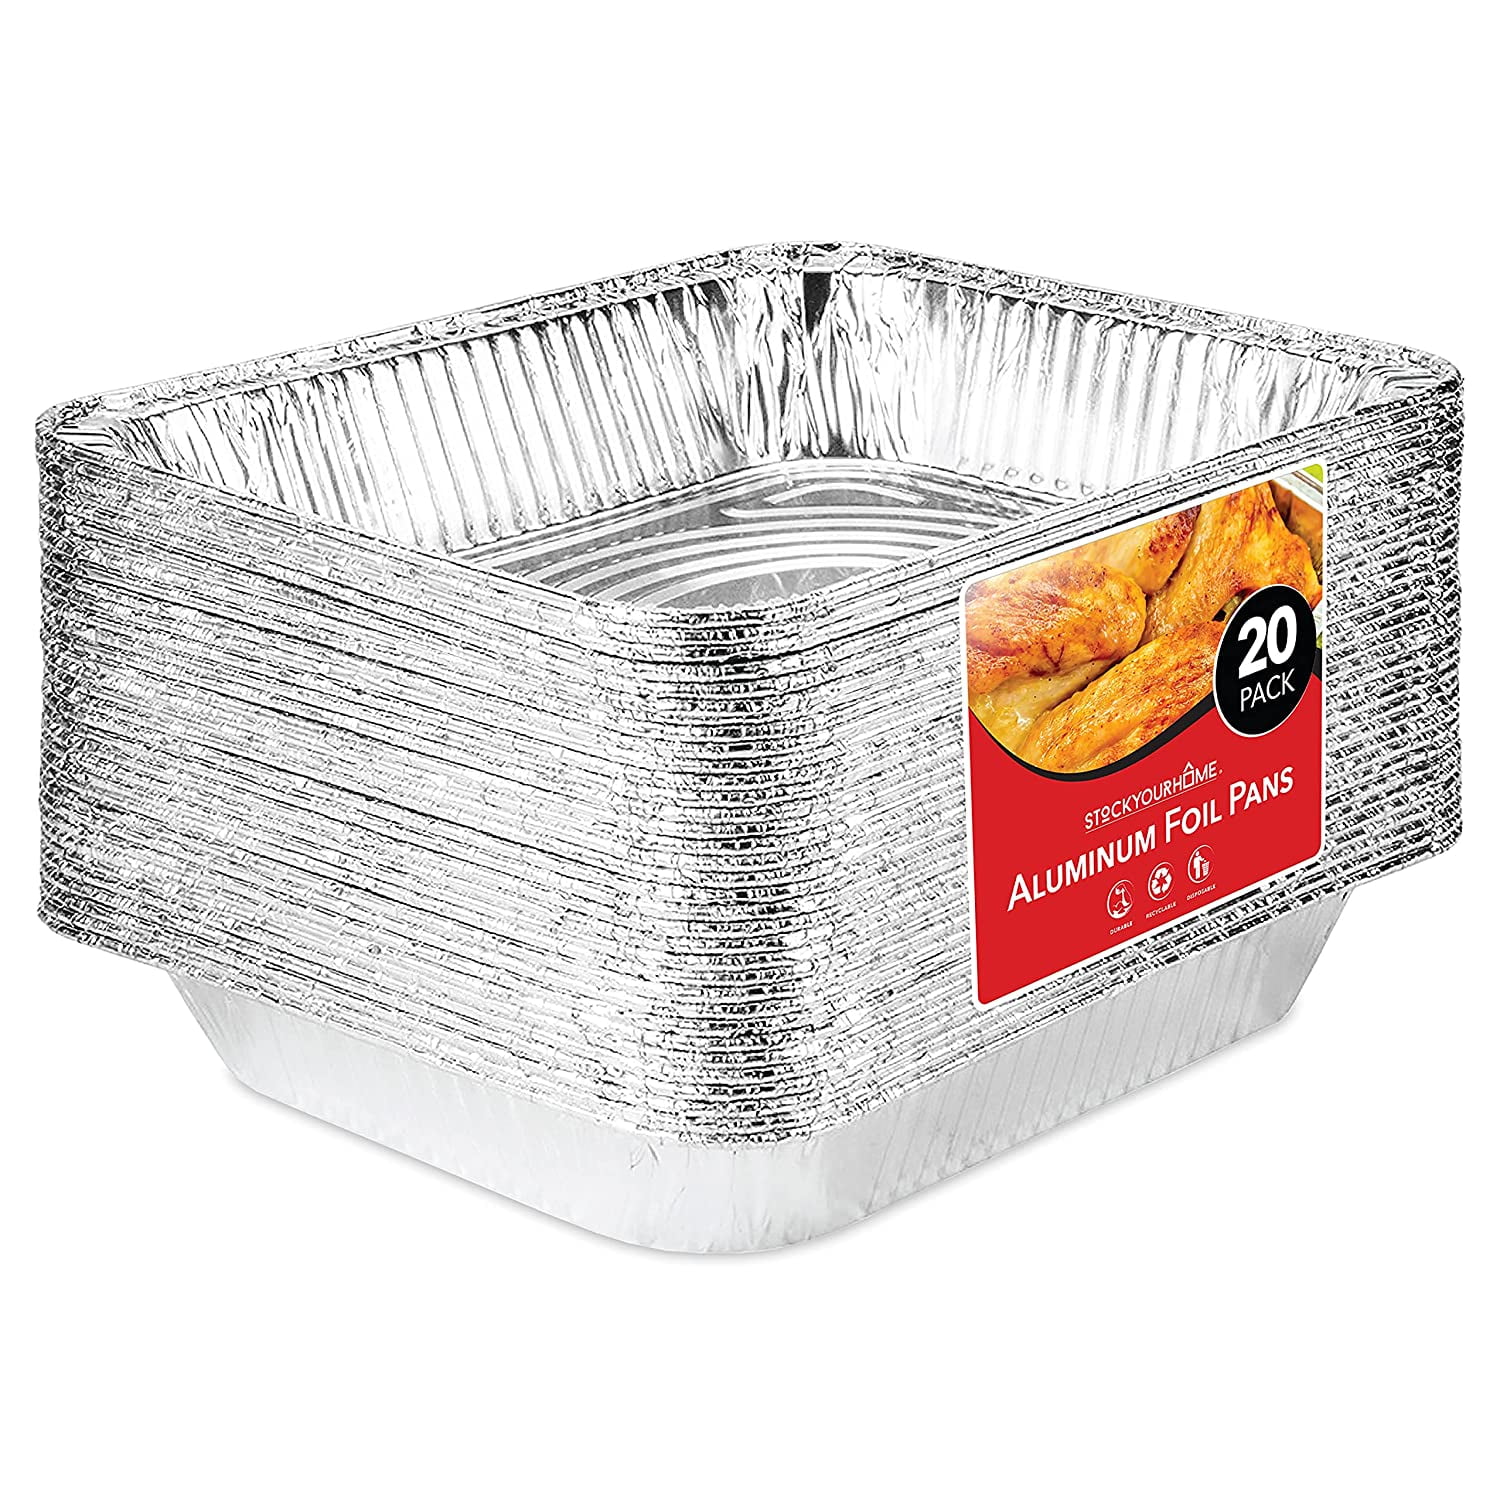 50pc Half-Size 9" x 13" Aluminum Deep Steam Disposable Pans Extra Heavy Weight 